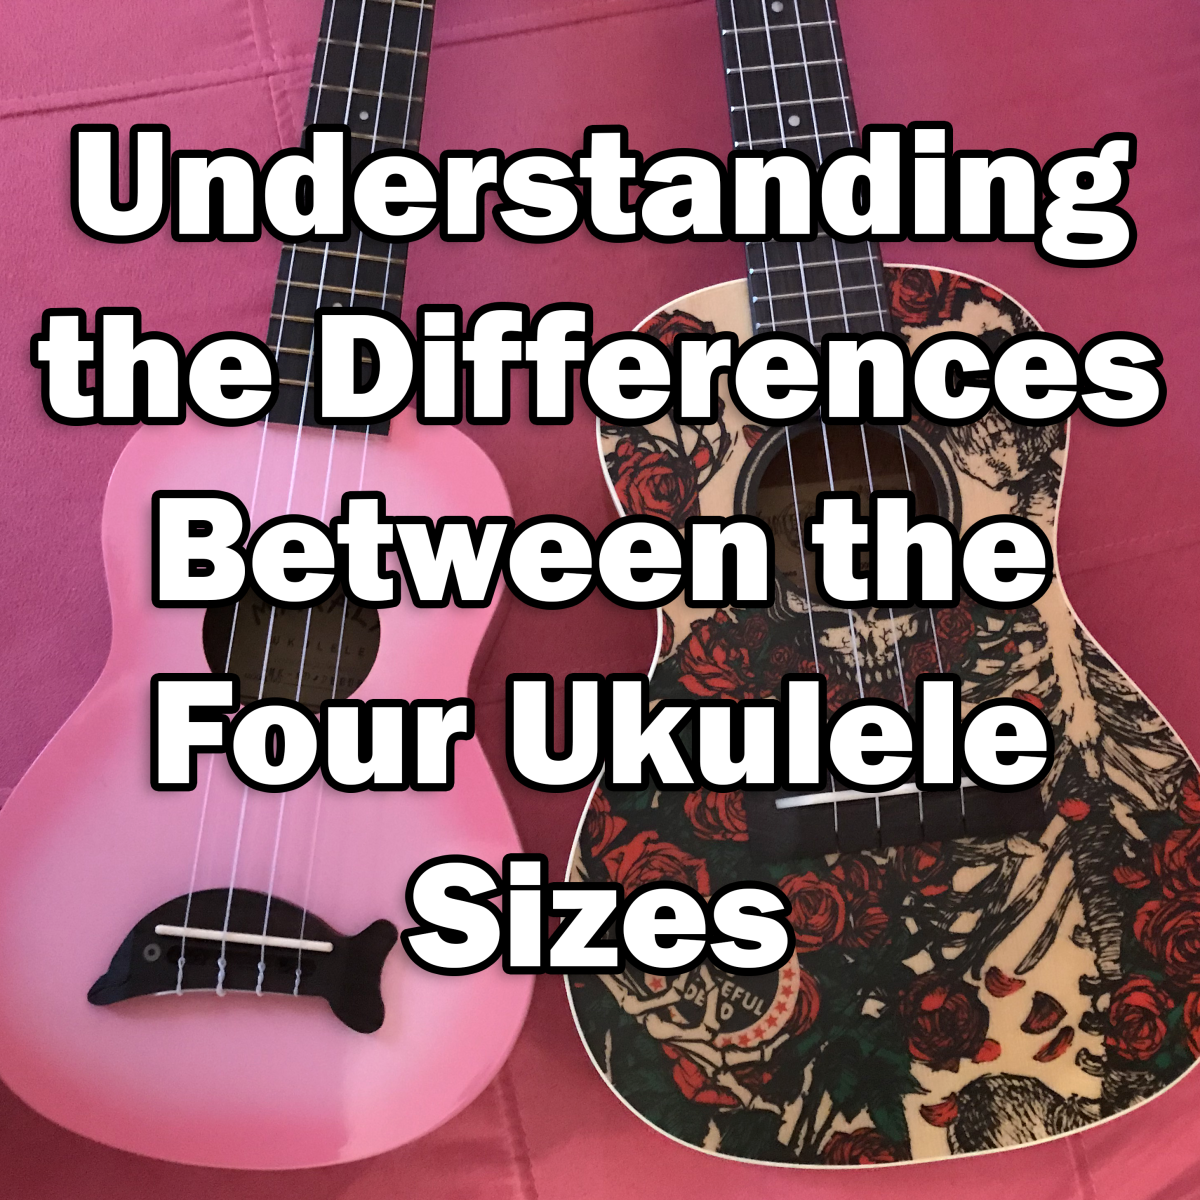 Understanding the Differences Between the Four Ukulele Sizes: Soprano, Concert, Tenor, and Baritone